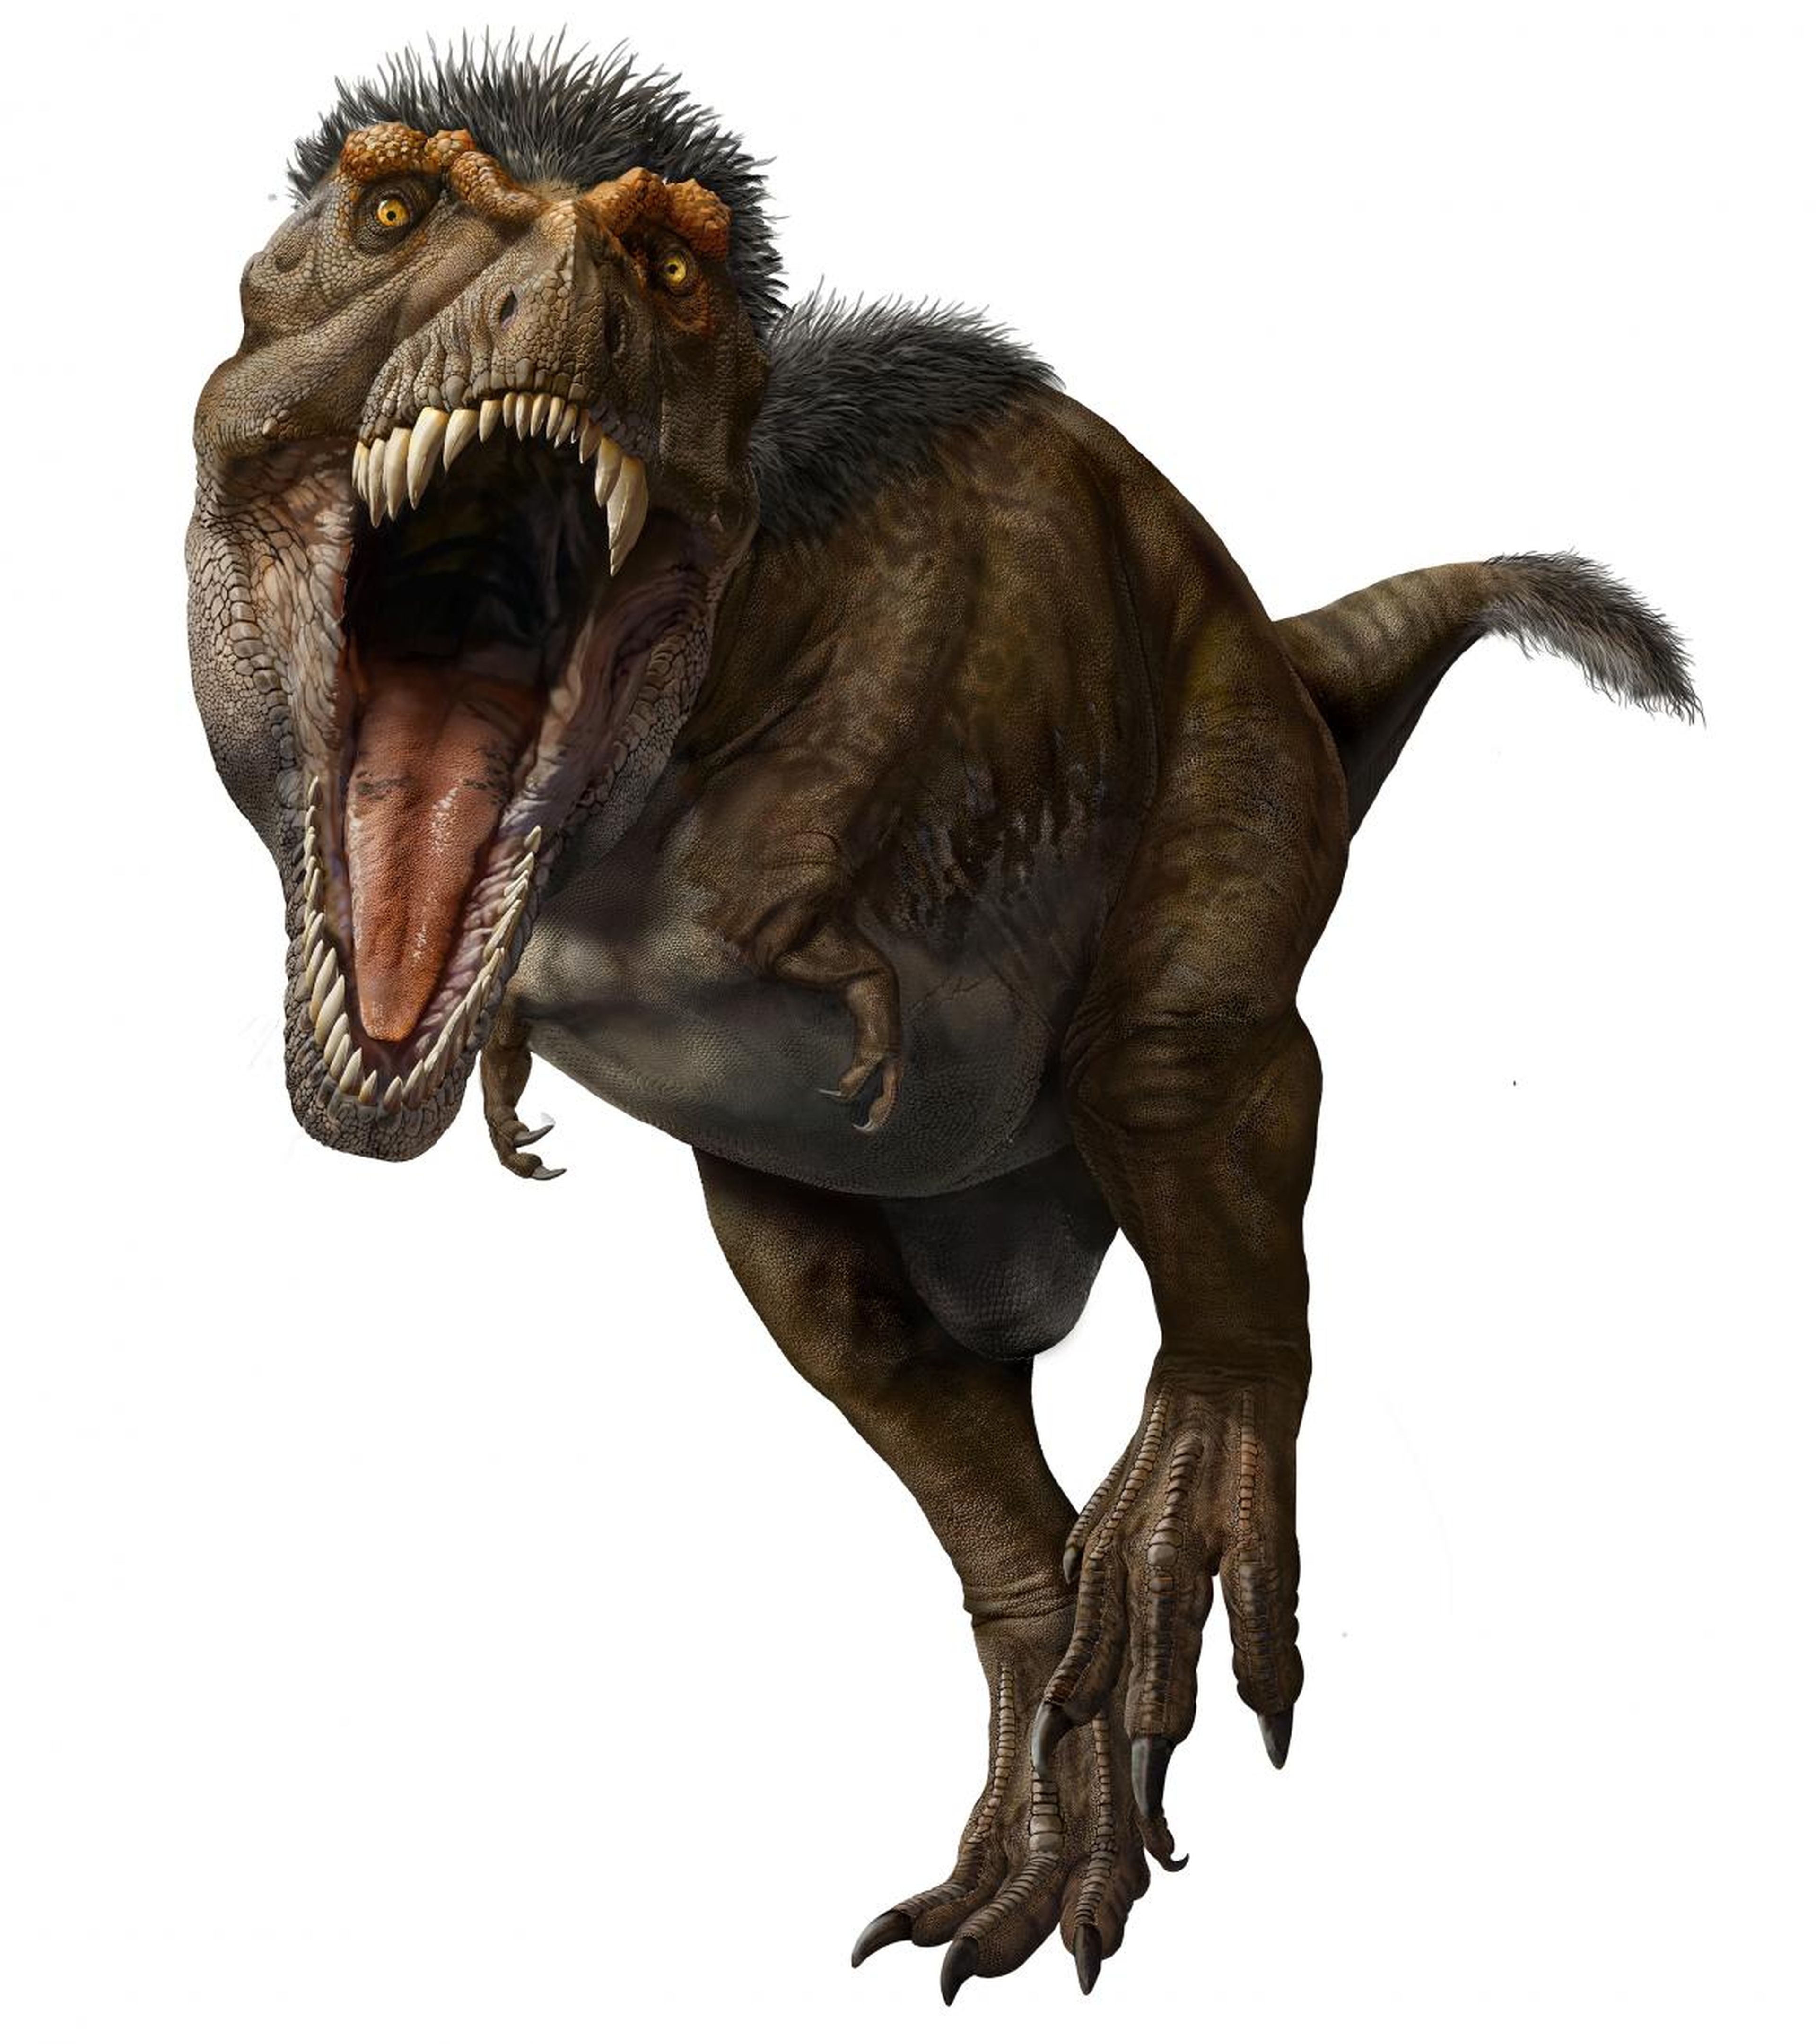 The T. rex rocked a mullet of feathers on its head and neck, and some on its tail too.